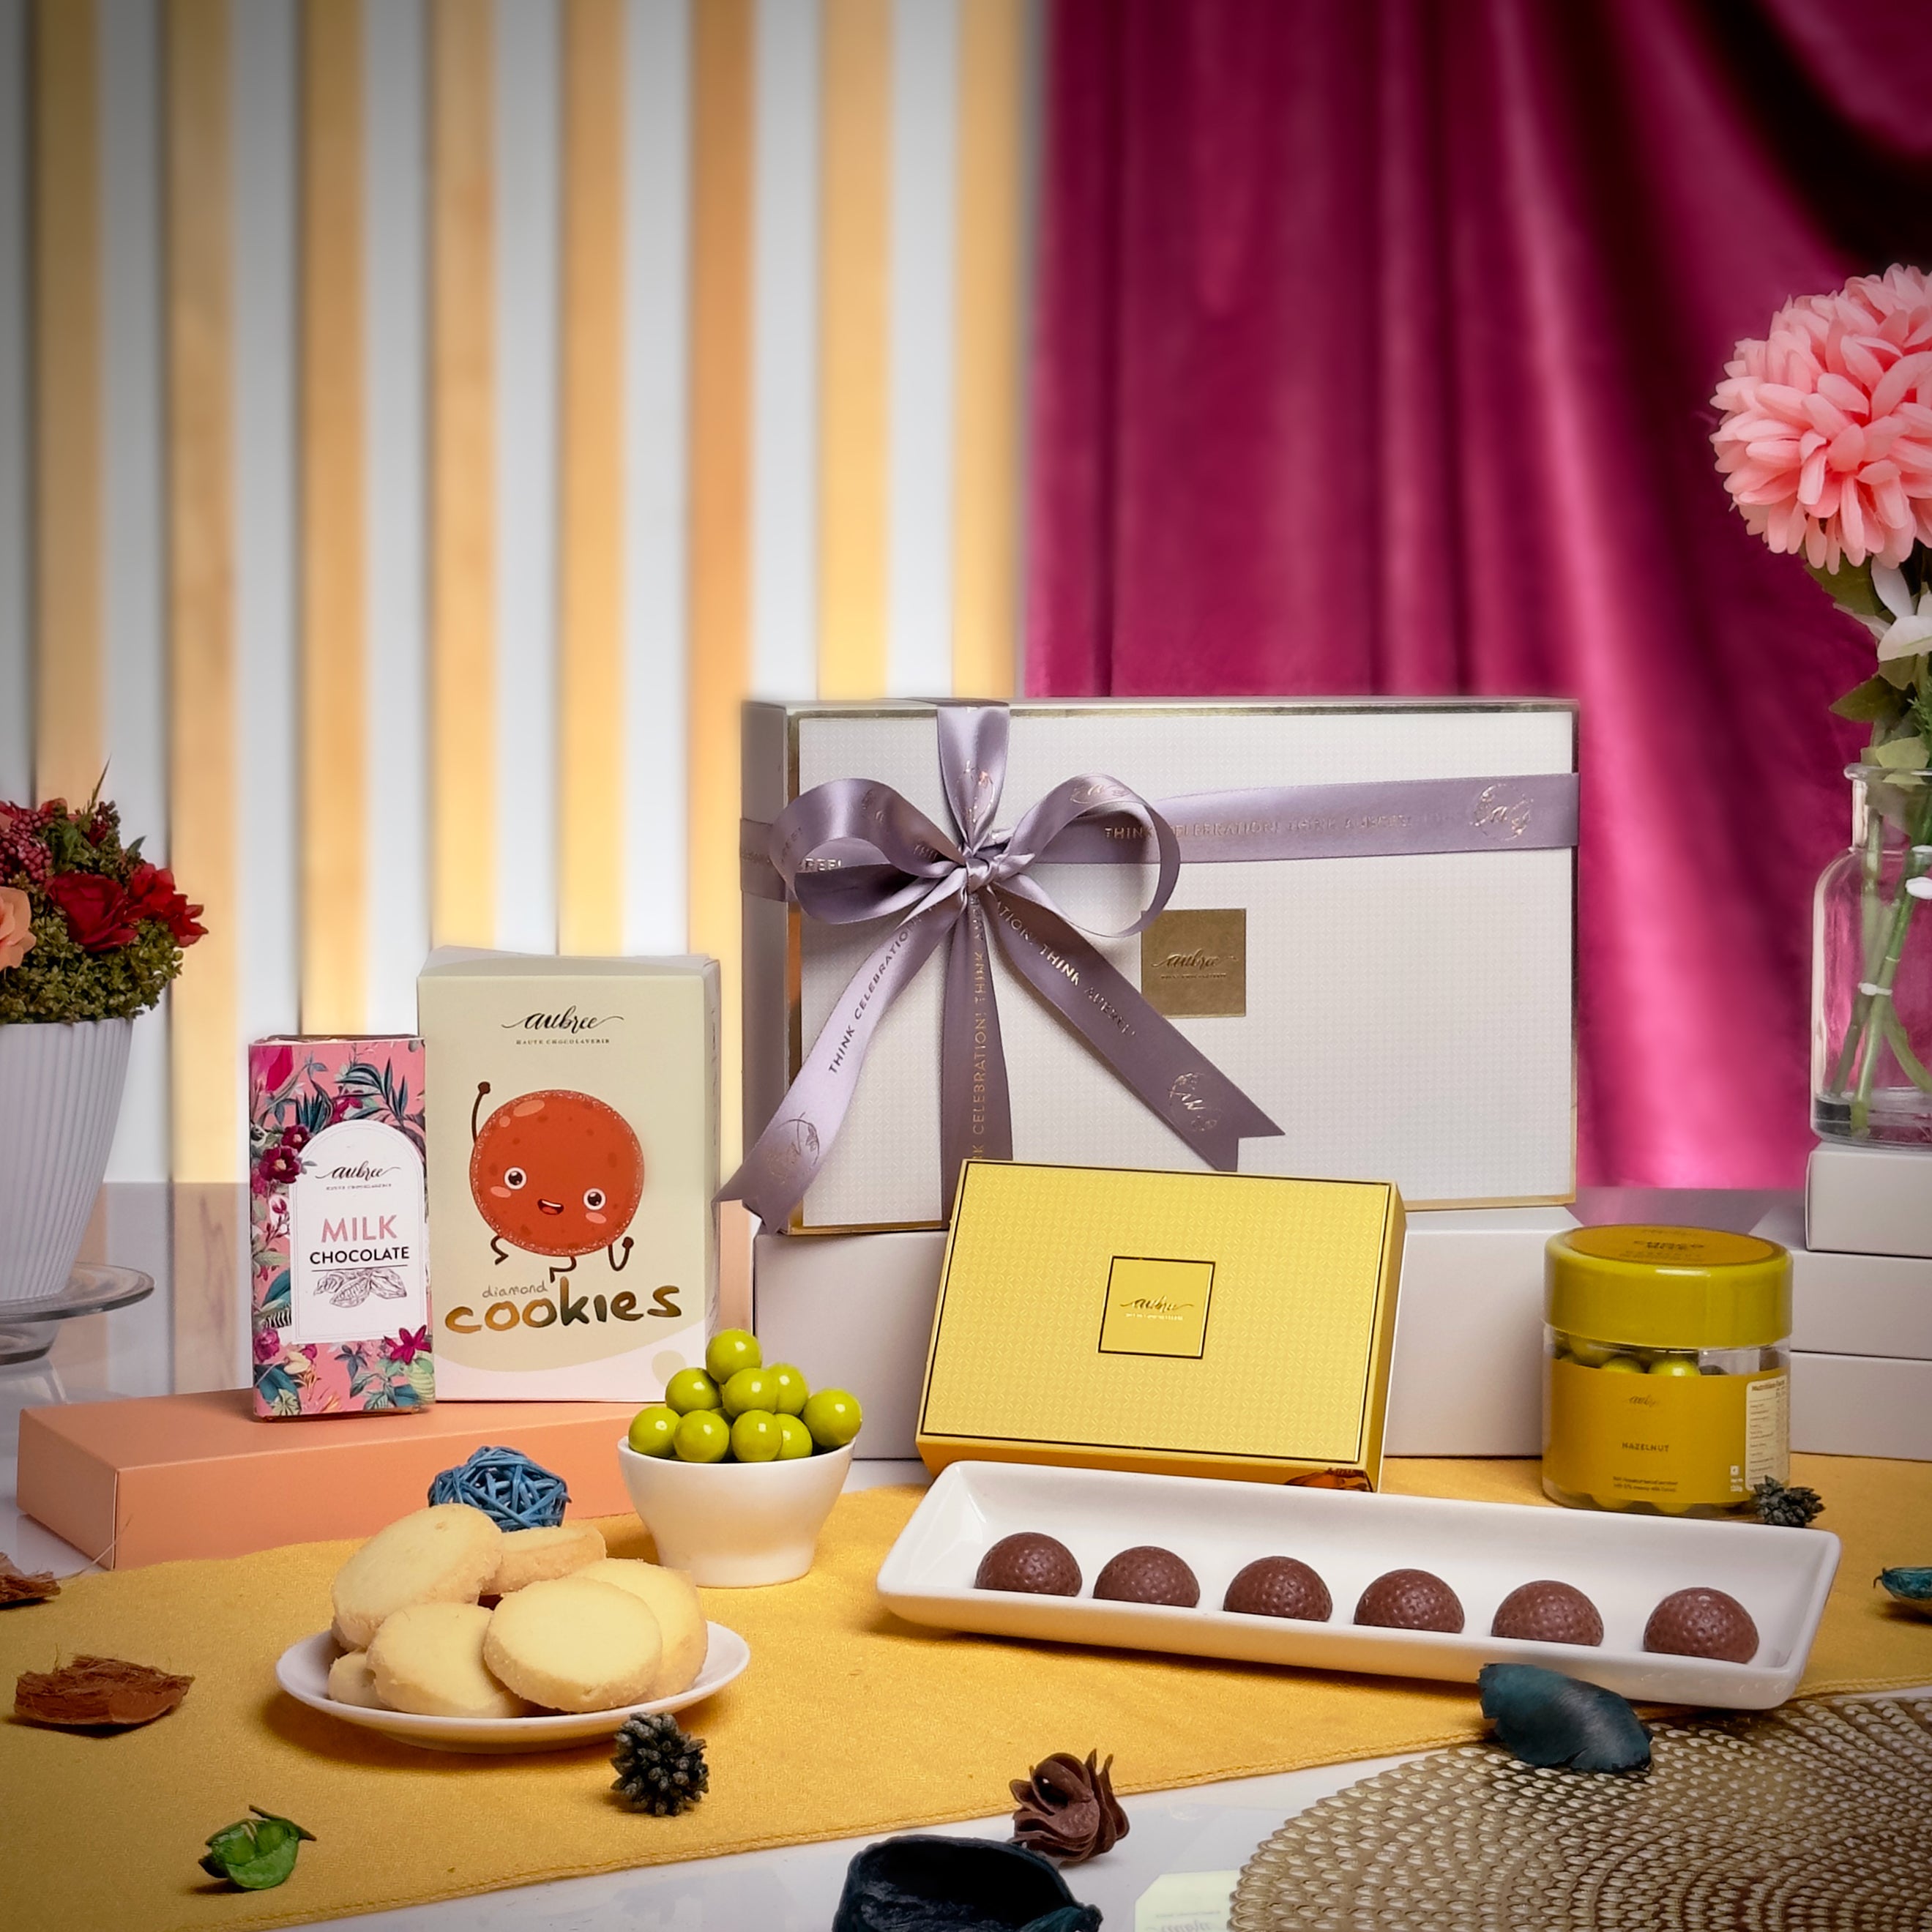 Pamper Your Loved Ones With The Specially Curated Gift Hampers From Here! |  LBB